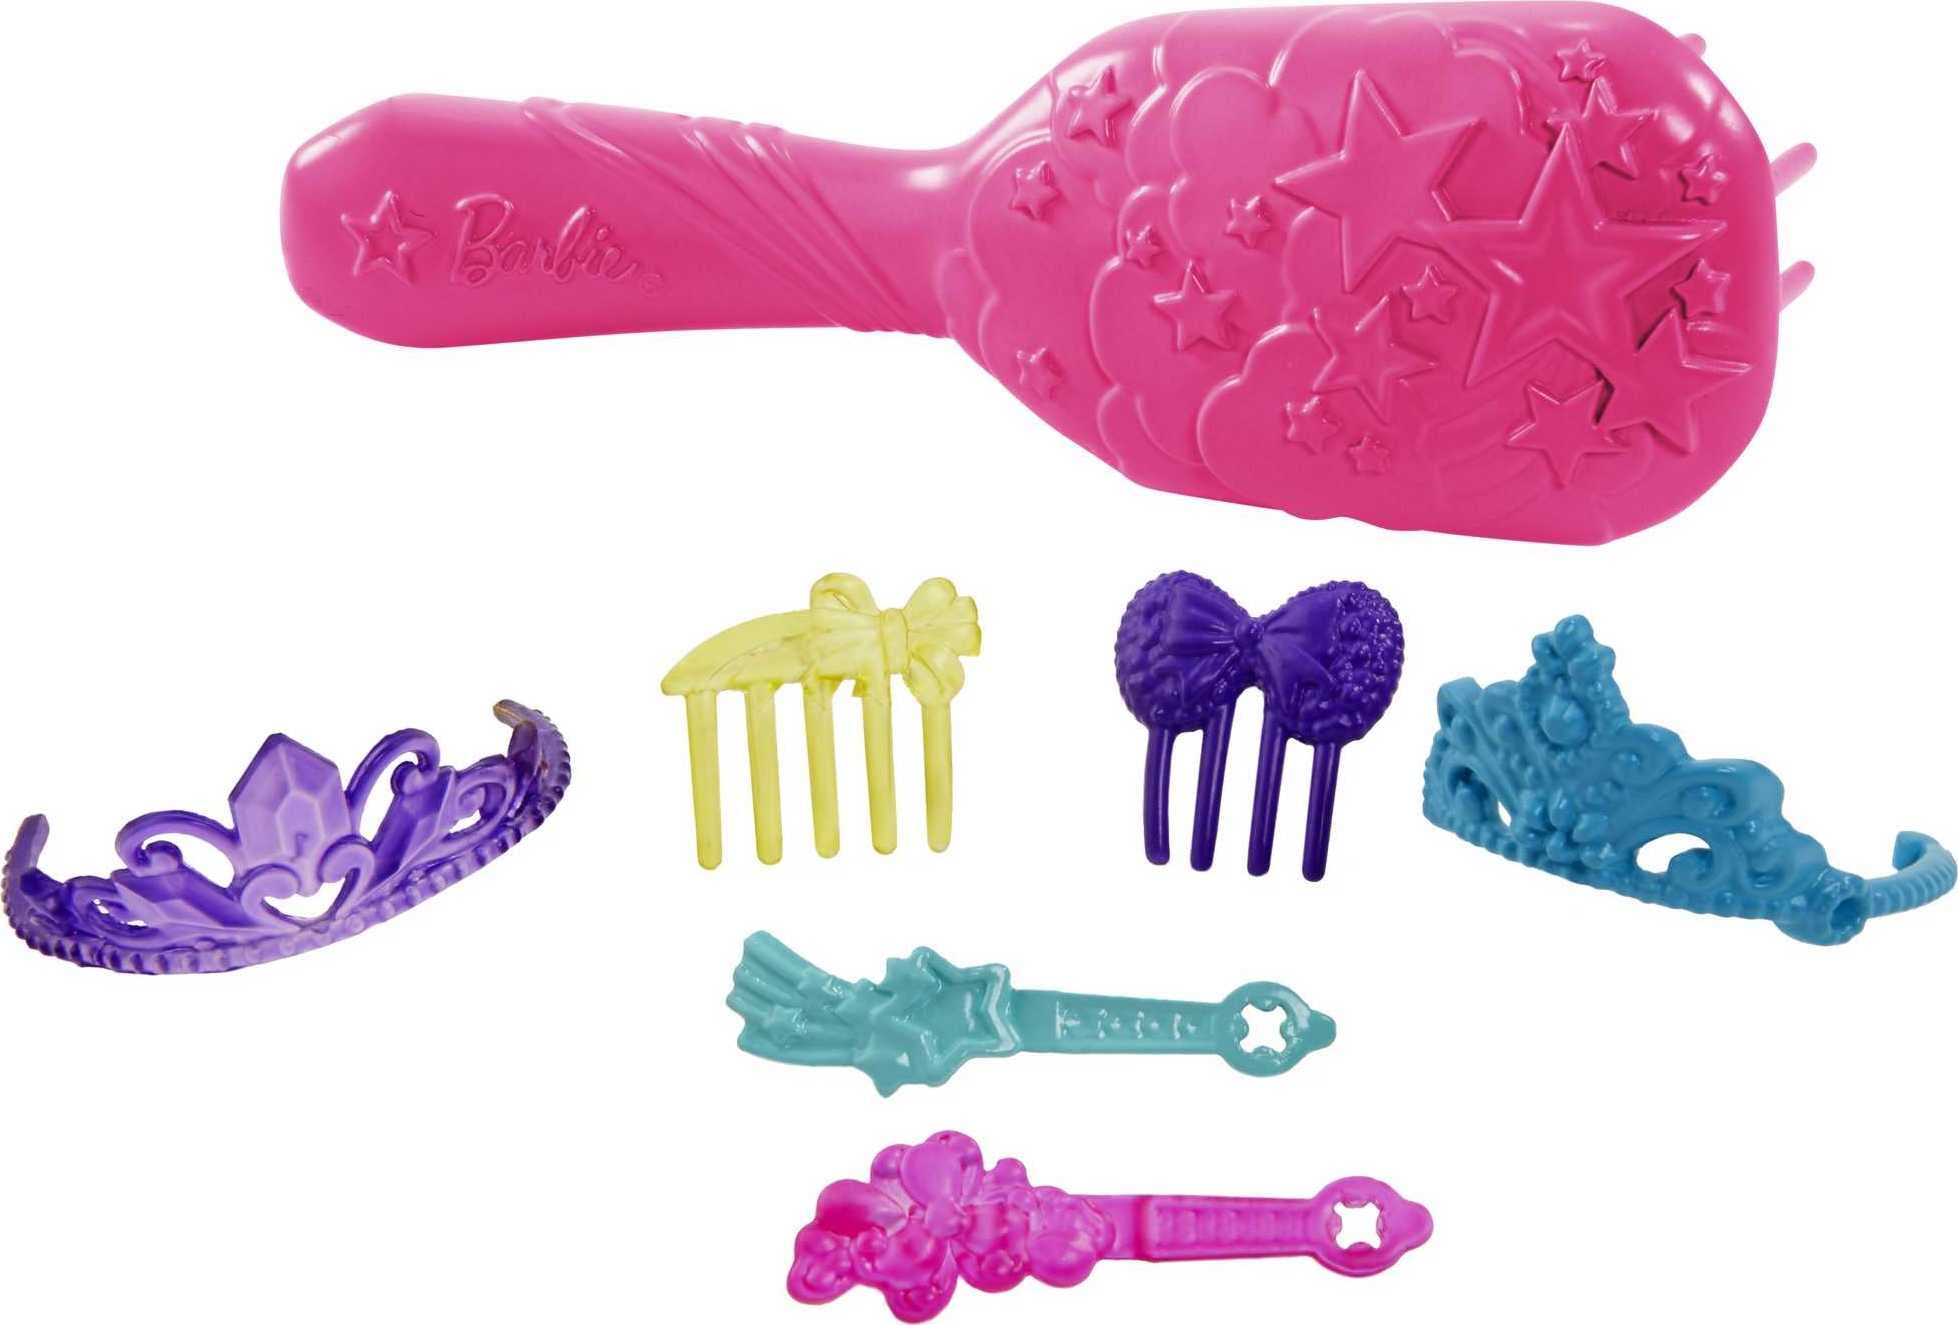 Barbie Dreamtopia Doll, Mermaid Toys, Pink Ombre Tail & Extra-Long Fantasy Hair with Brush, Tiaras & Styling Accessories